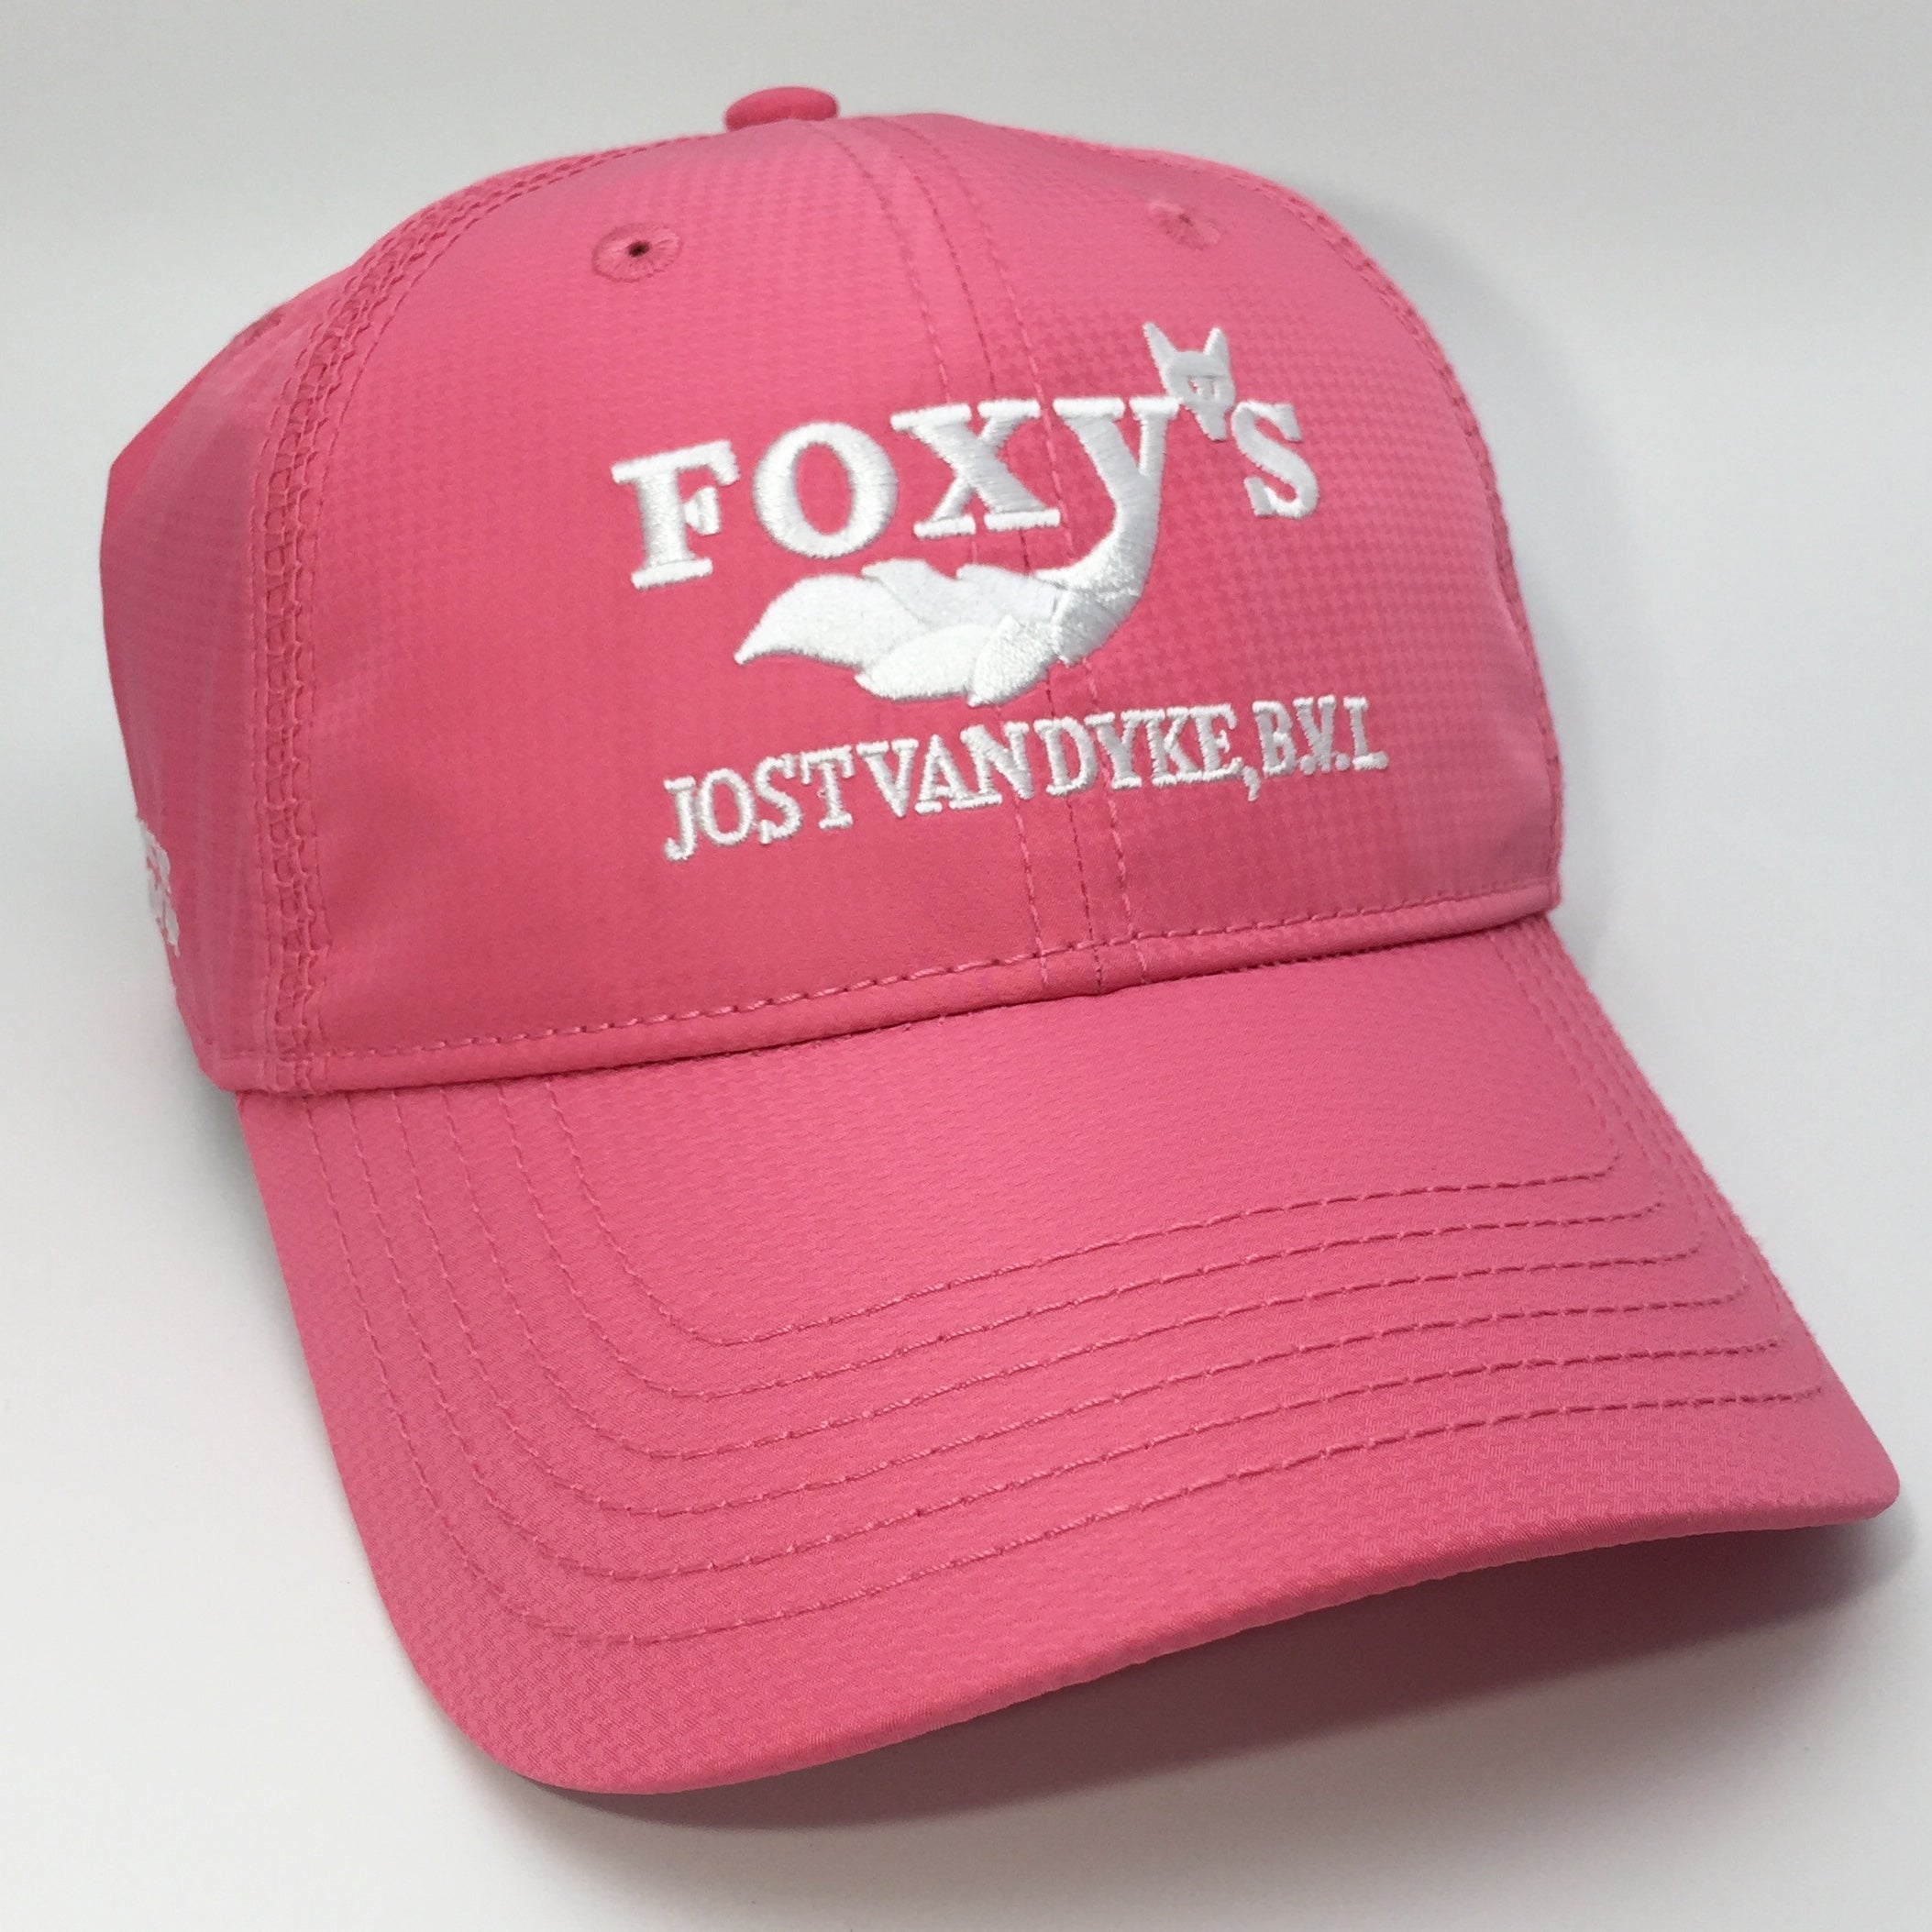 Foxy's Classic Logo Ladies Kate Lord Houndstooth Performance Cap